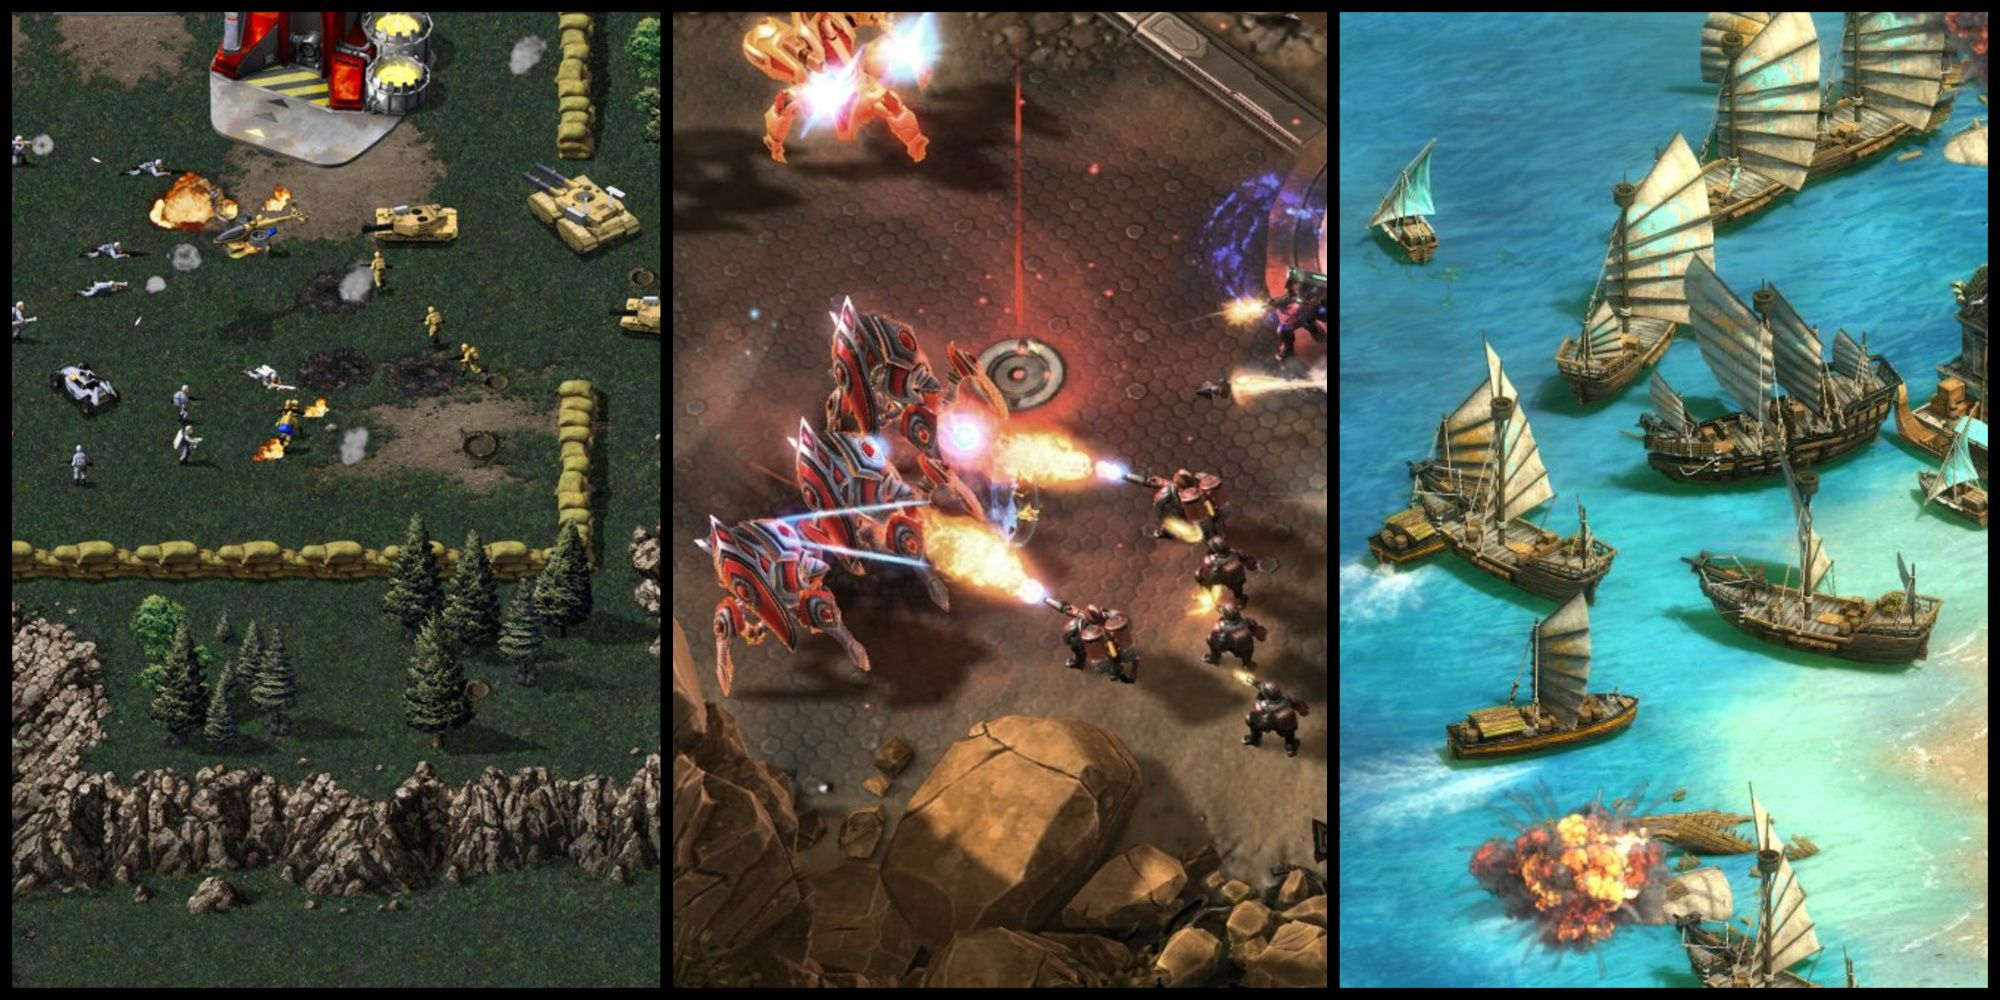 Screenshots from Command and Conquer, StarCraft 2, and Age of Empire 2